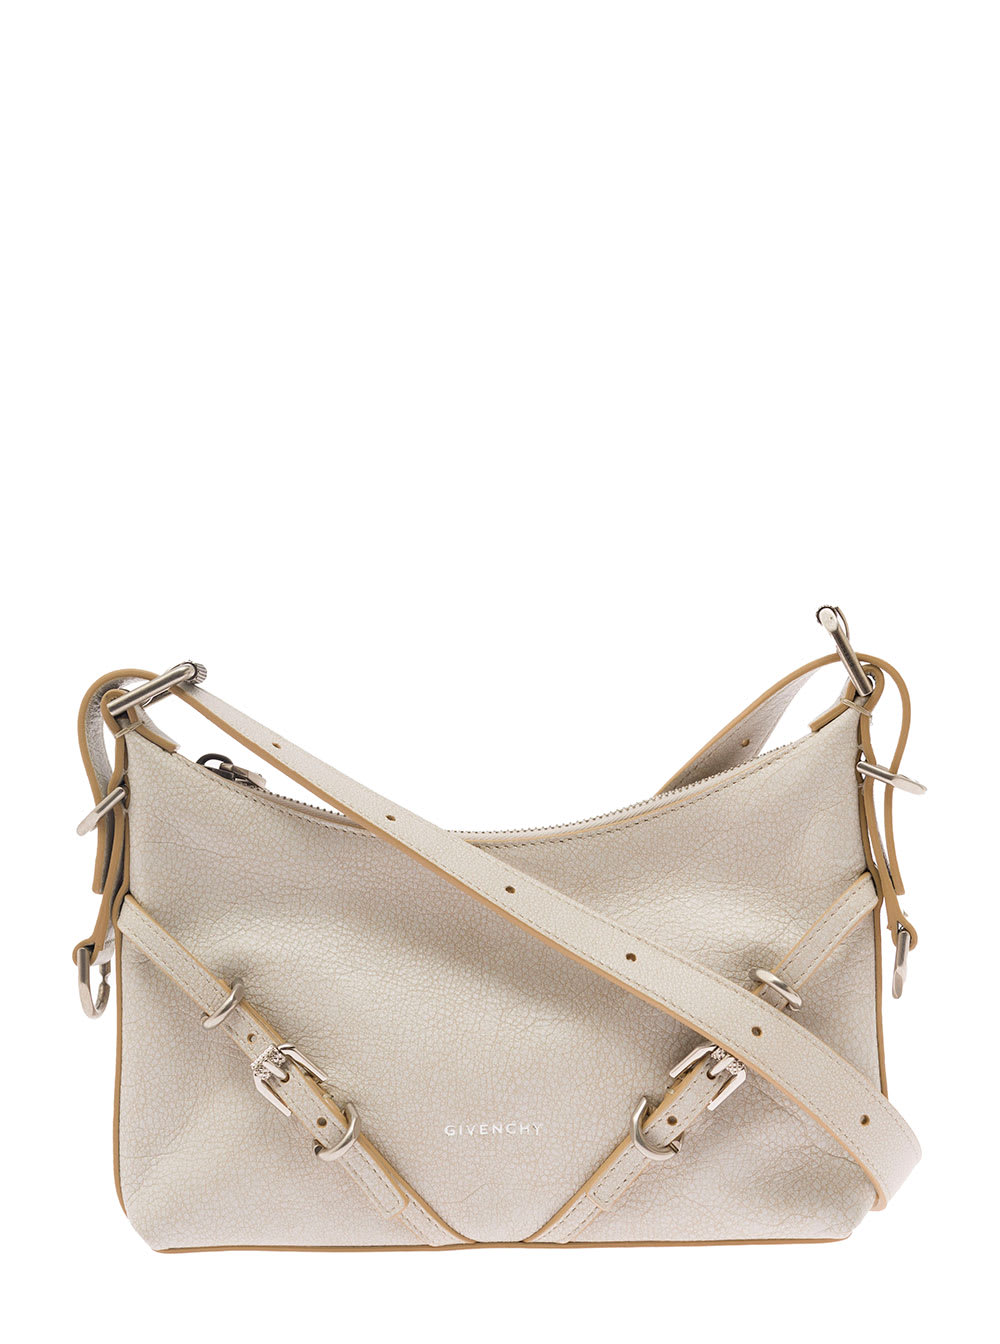 Givenchy Mini Voyou White Shoulder Bag With Buckles Embellishment In Hammered Leather Woman